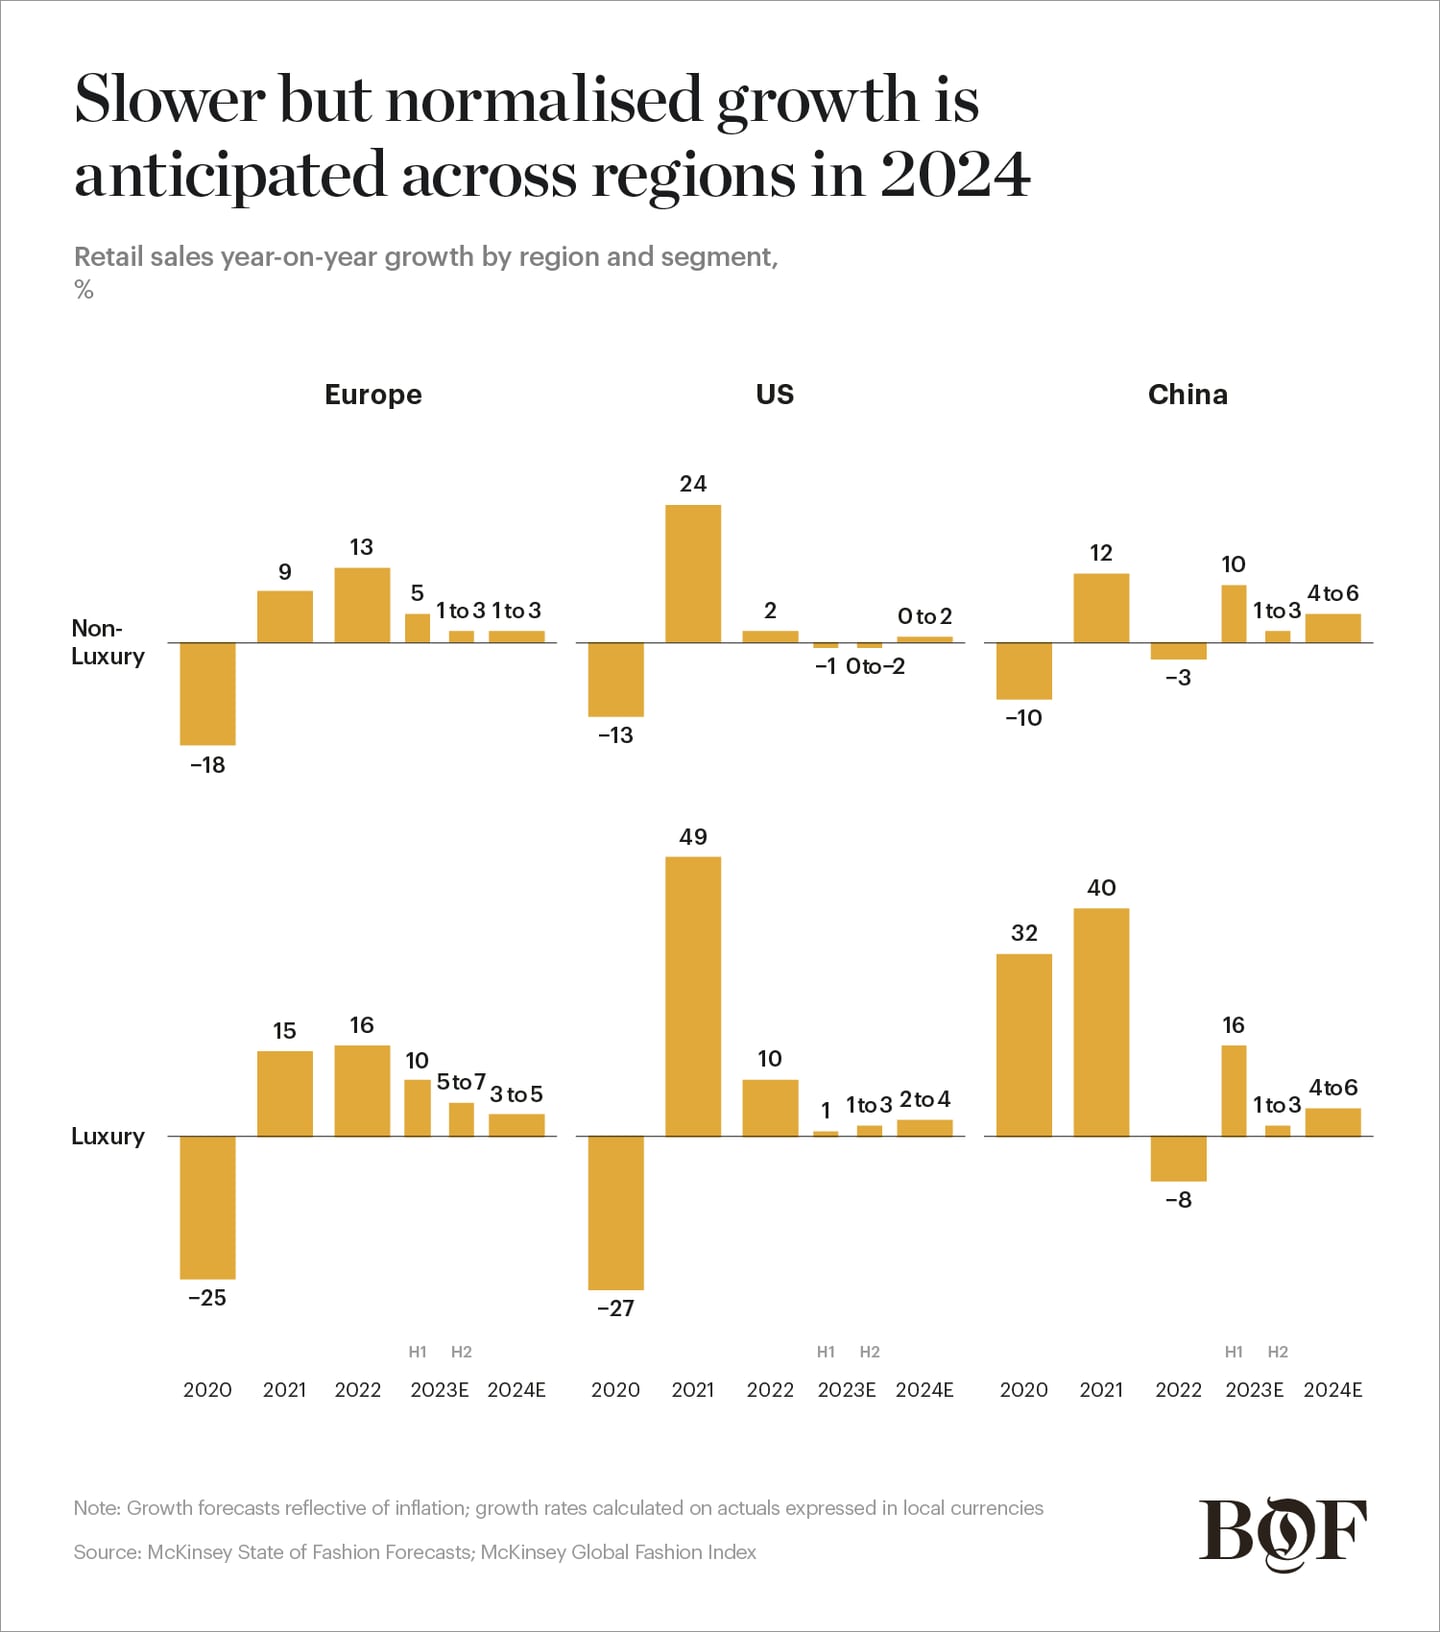 Bar chart showing growth across geographies in 2024